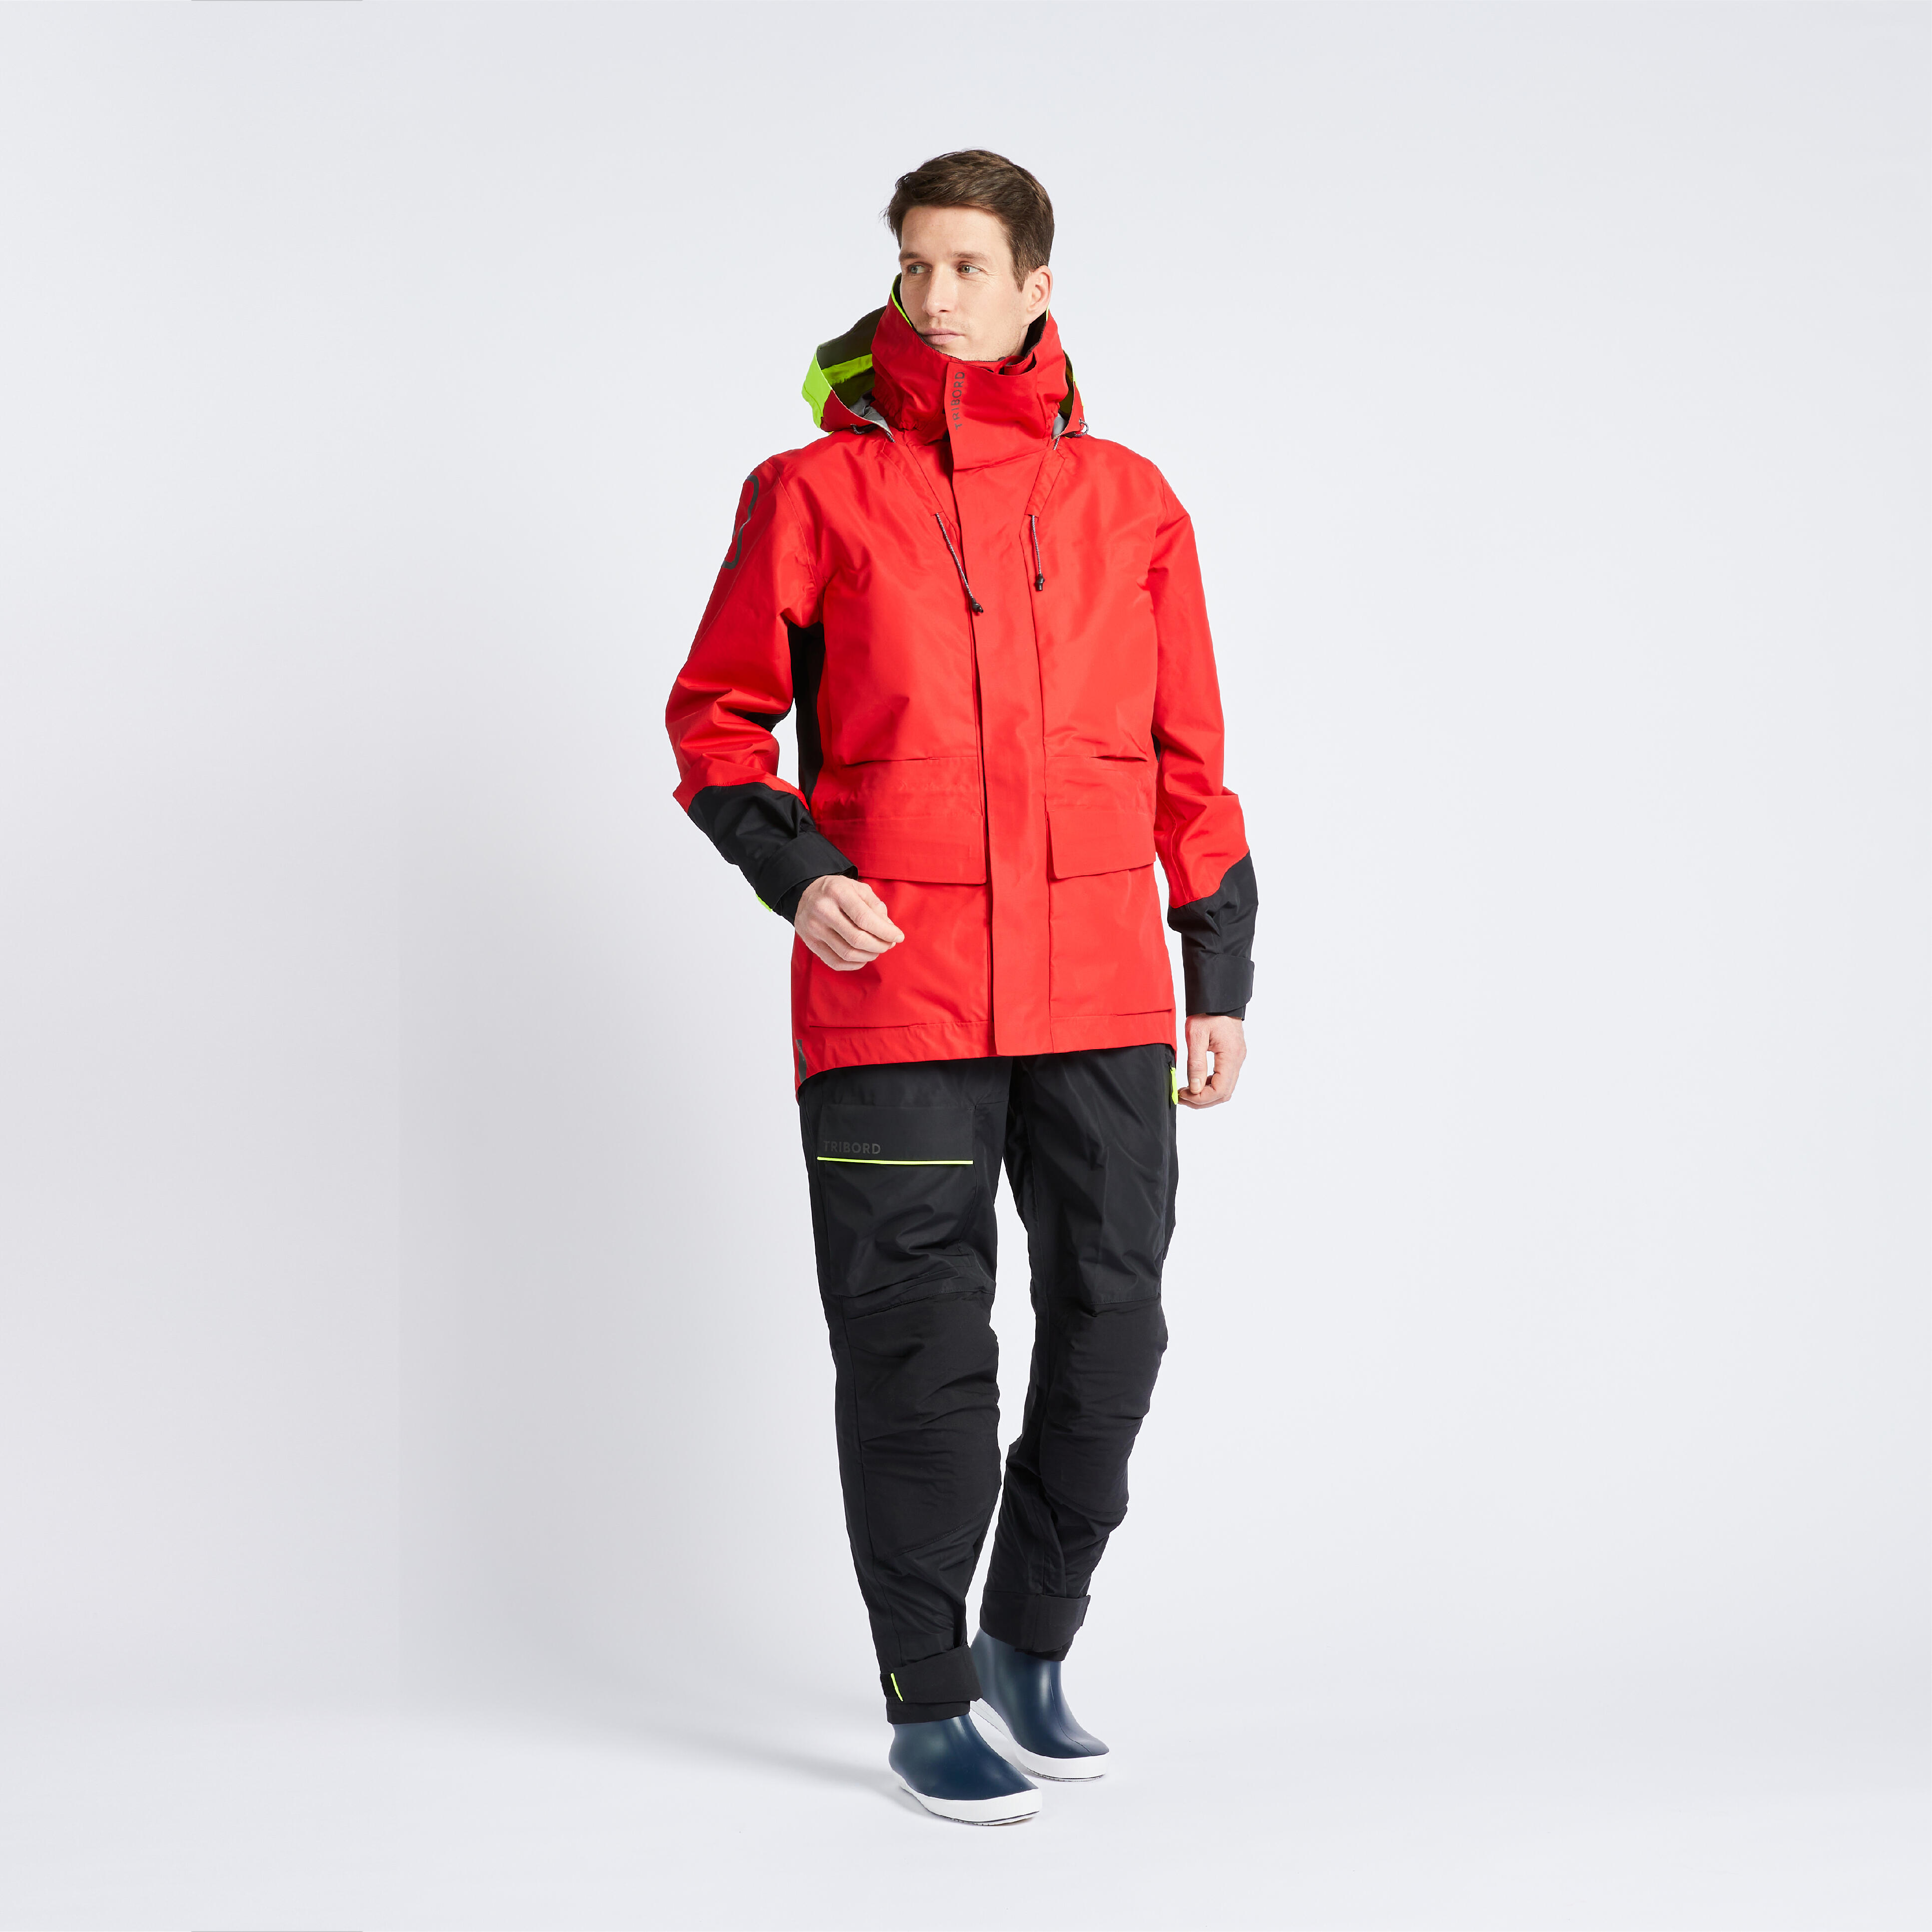 Men’s Offshore Sailing Jacket - 900 Red - TRIBORD